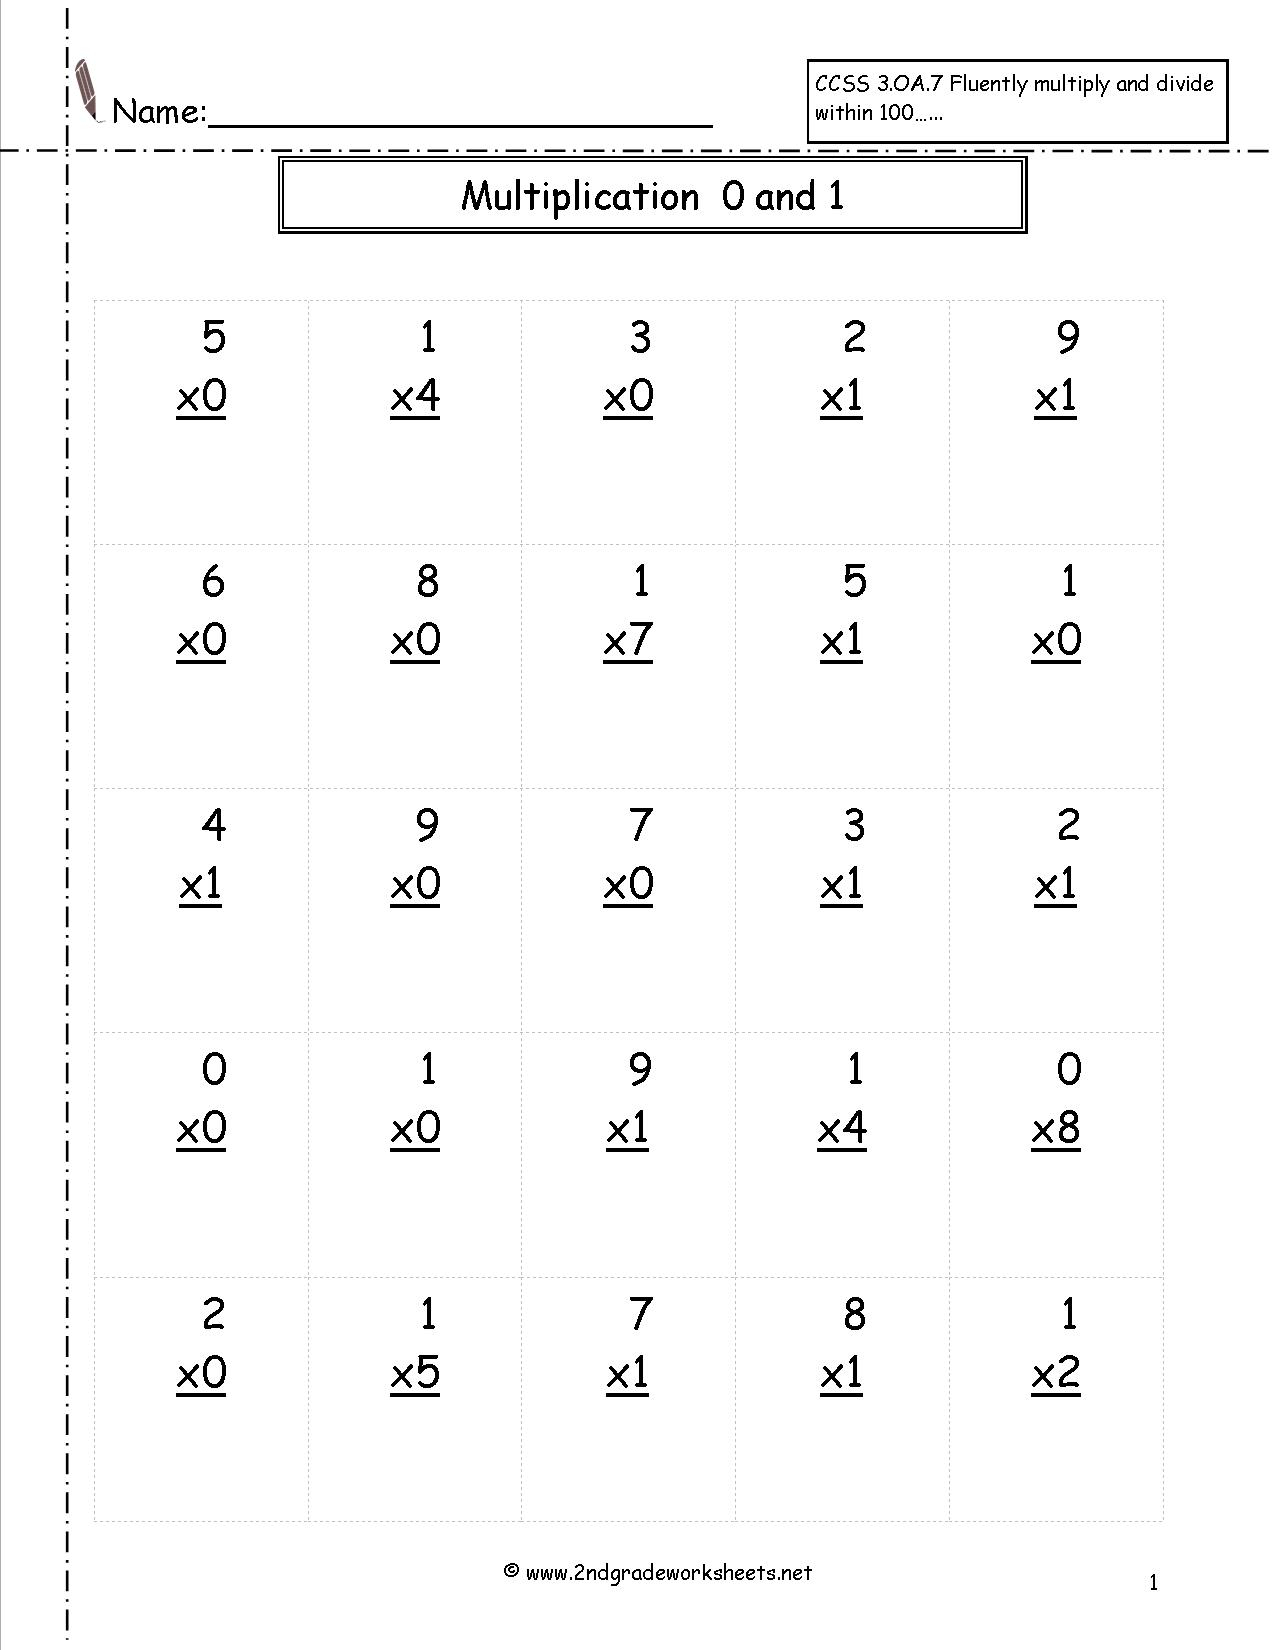 Multiplication Worksheets And Printouts for Printable Multiplication Practice Worksheets